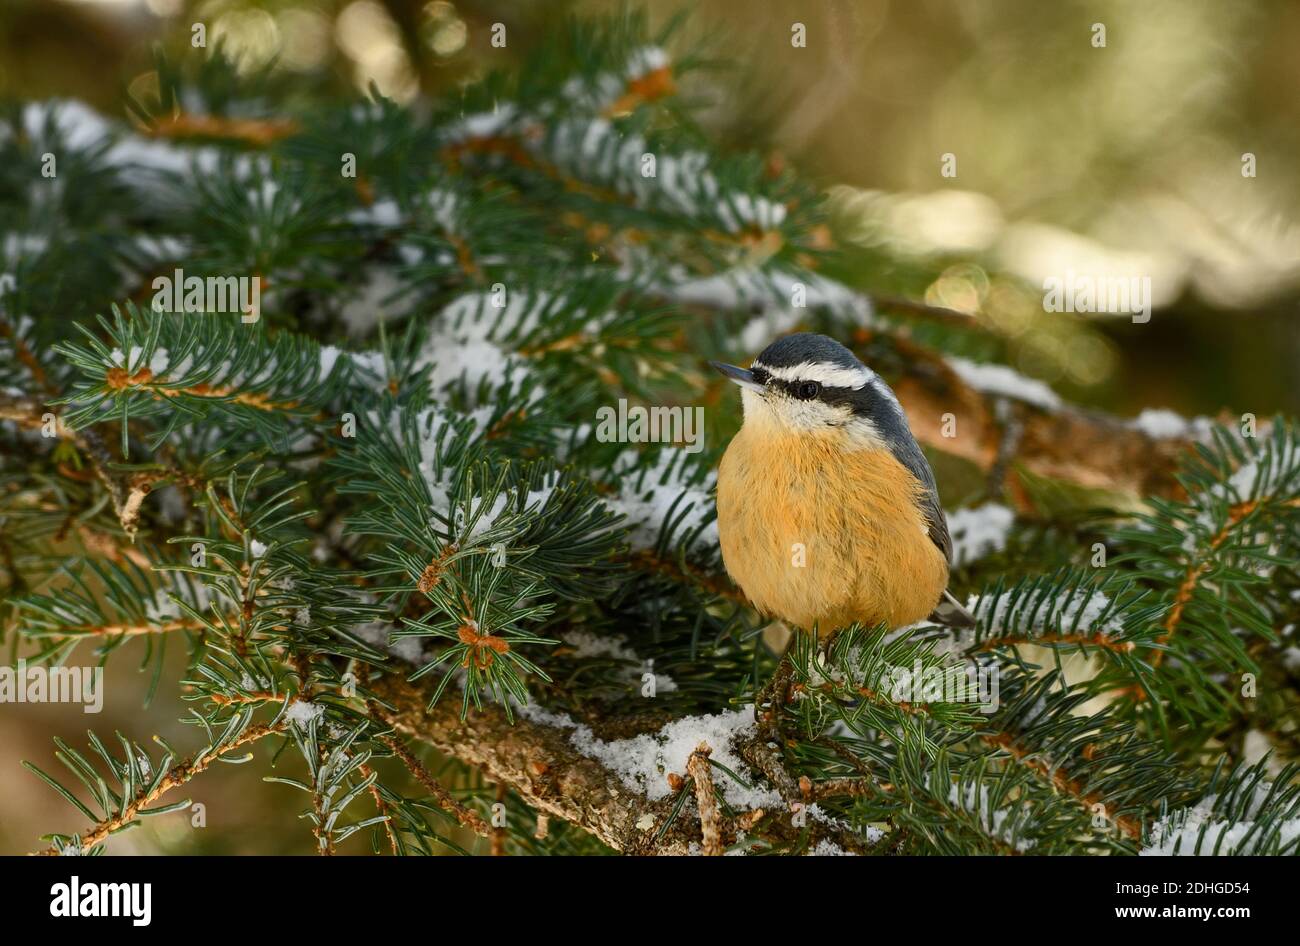 A  Red-breasted Nuthatch 'Sitta canadensis', perched on a green snow covered spruce tree branch in rural Alberta Canada Stock Photo